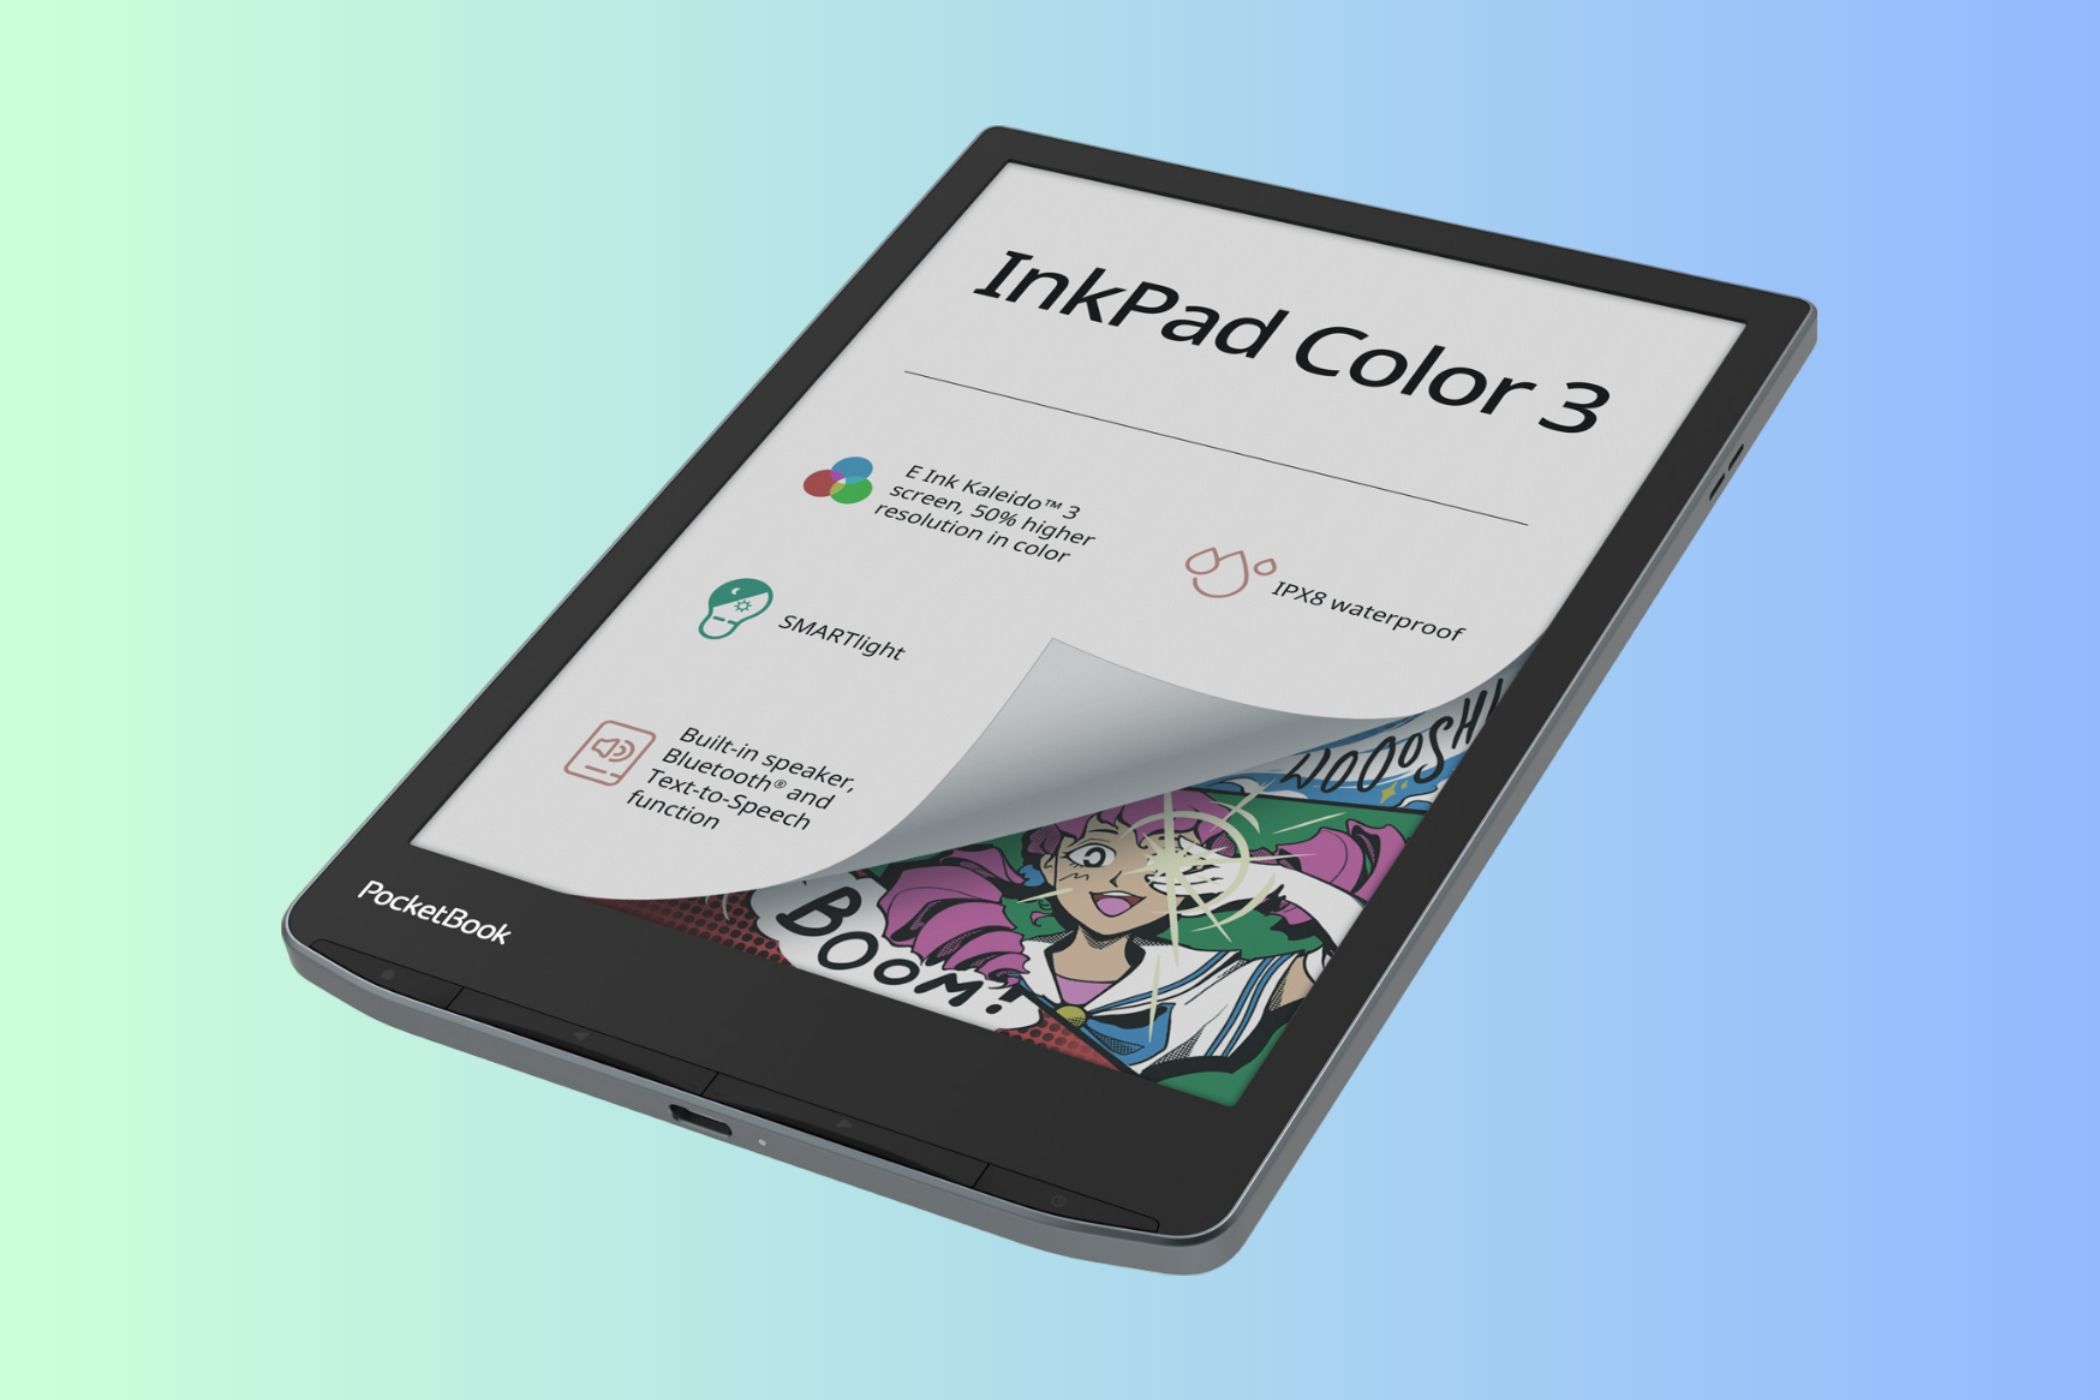 New PocketBook InkPad Color 3 Now Available for $329